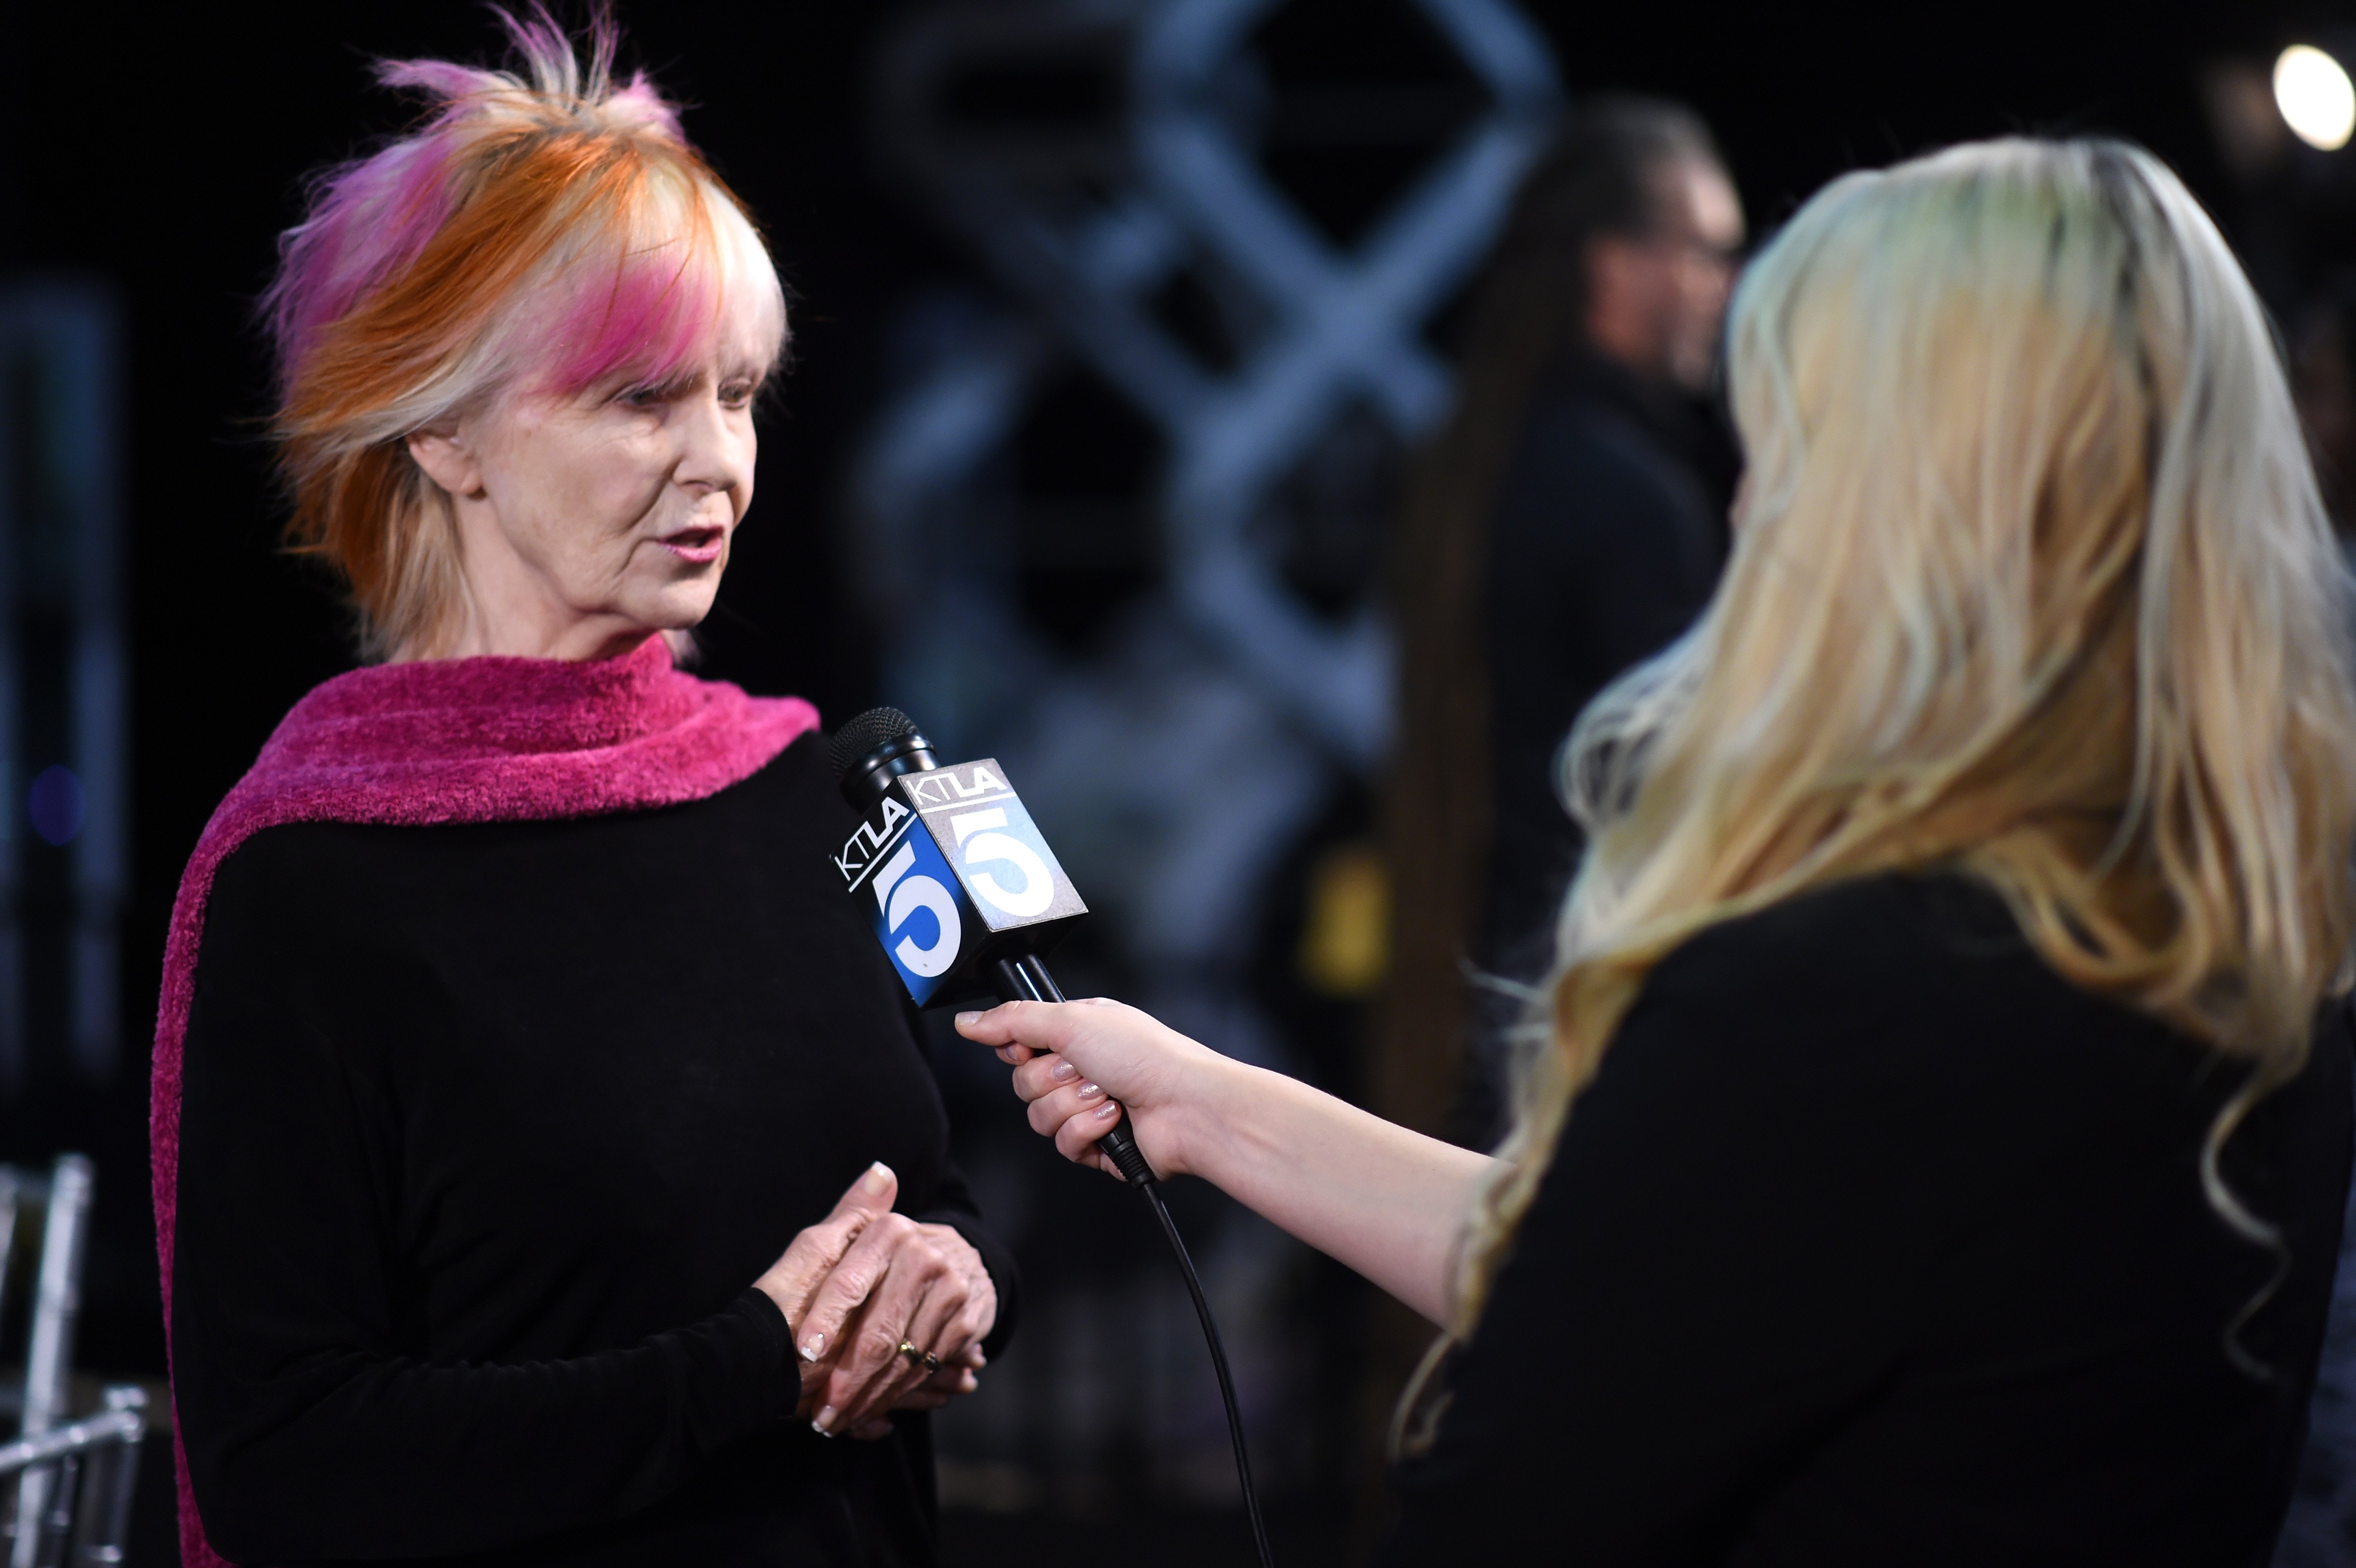 Shelley Fabares attends TNT's 21st Annual Screen Actors Guild Awards Behind The Scenes Day 1 at The Shrine Auditorium on January 22, 2015 in Los Angeles, California